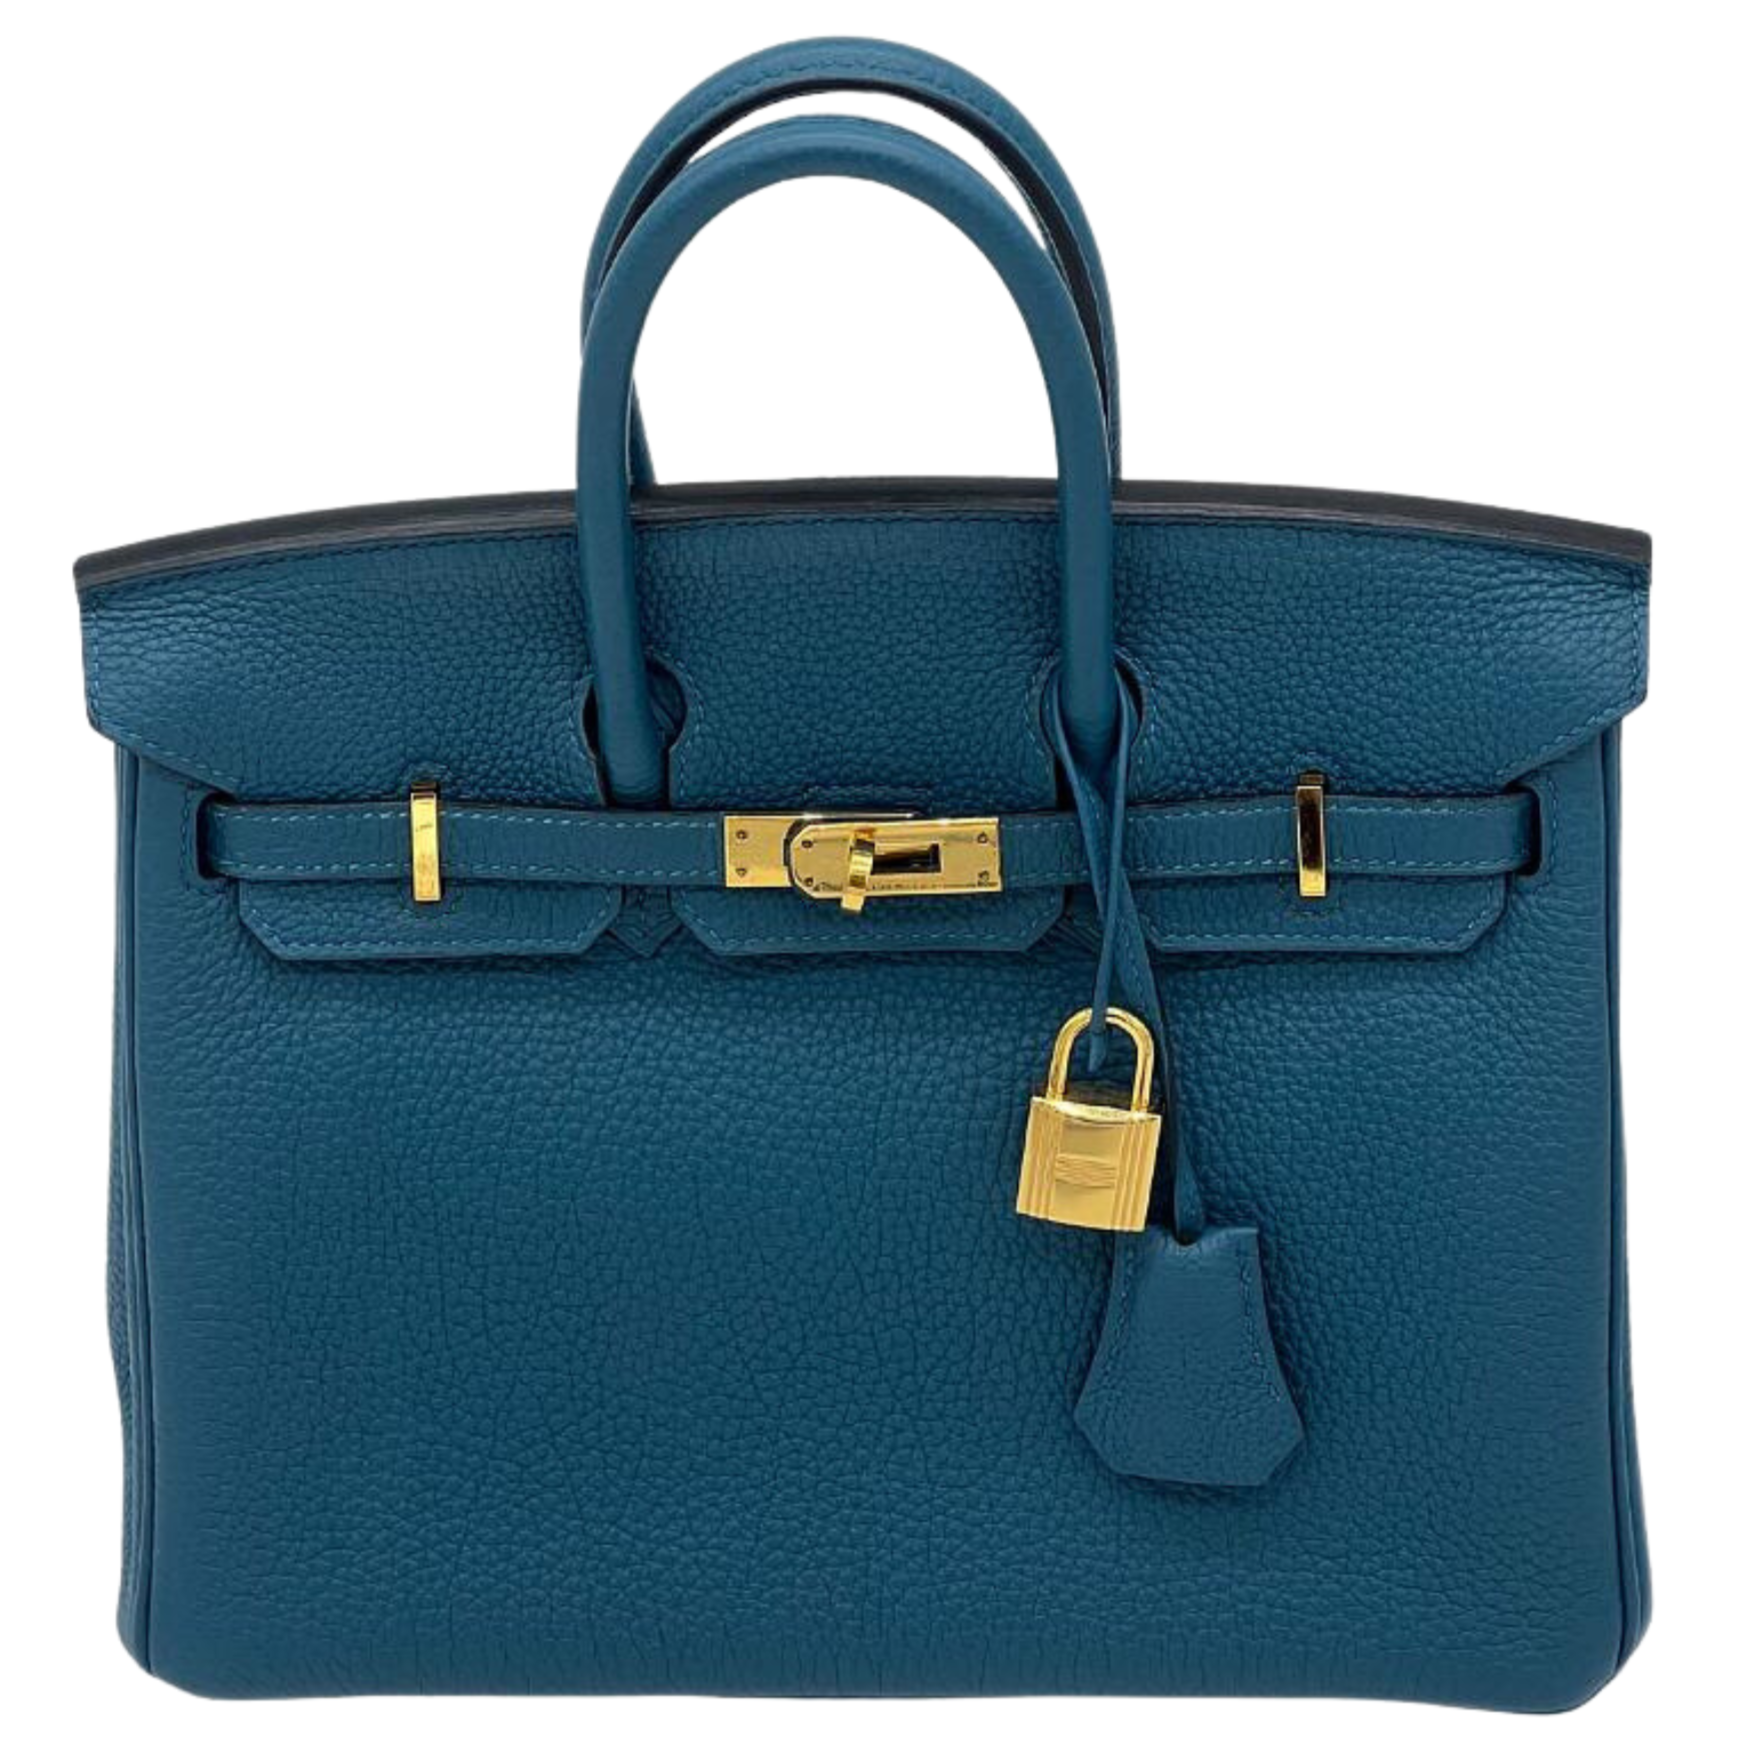 Pre-owned Hermes Blue thalasa 35 togo Leather with GHW